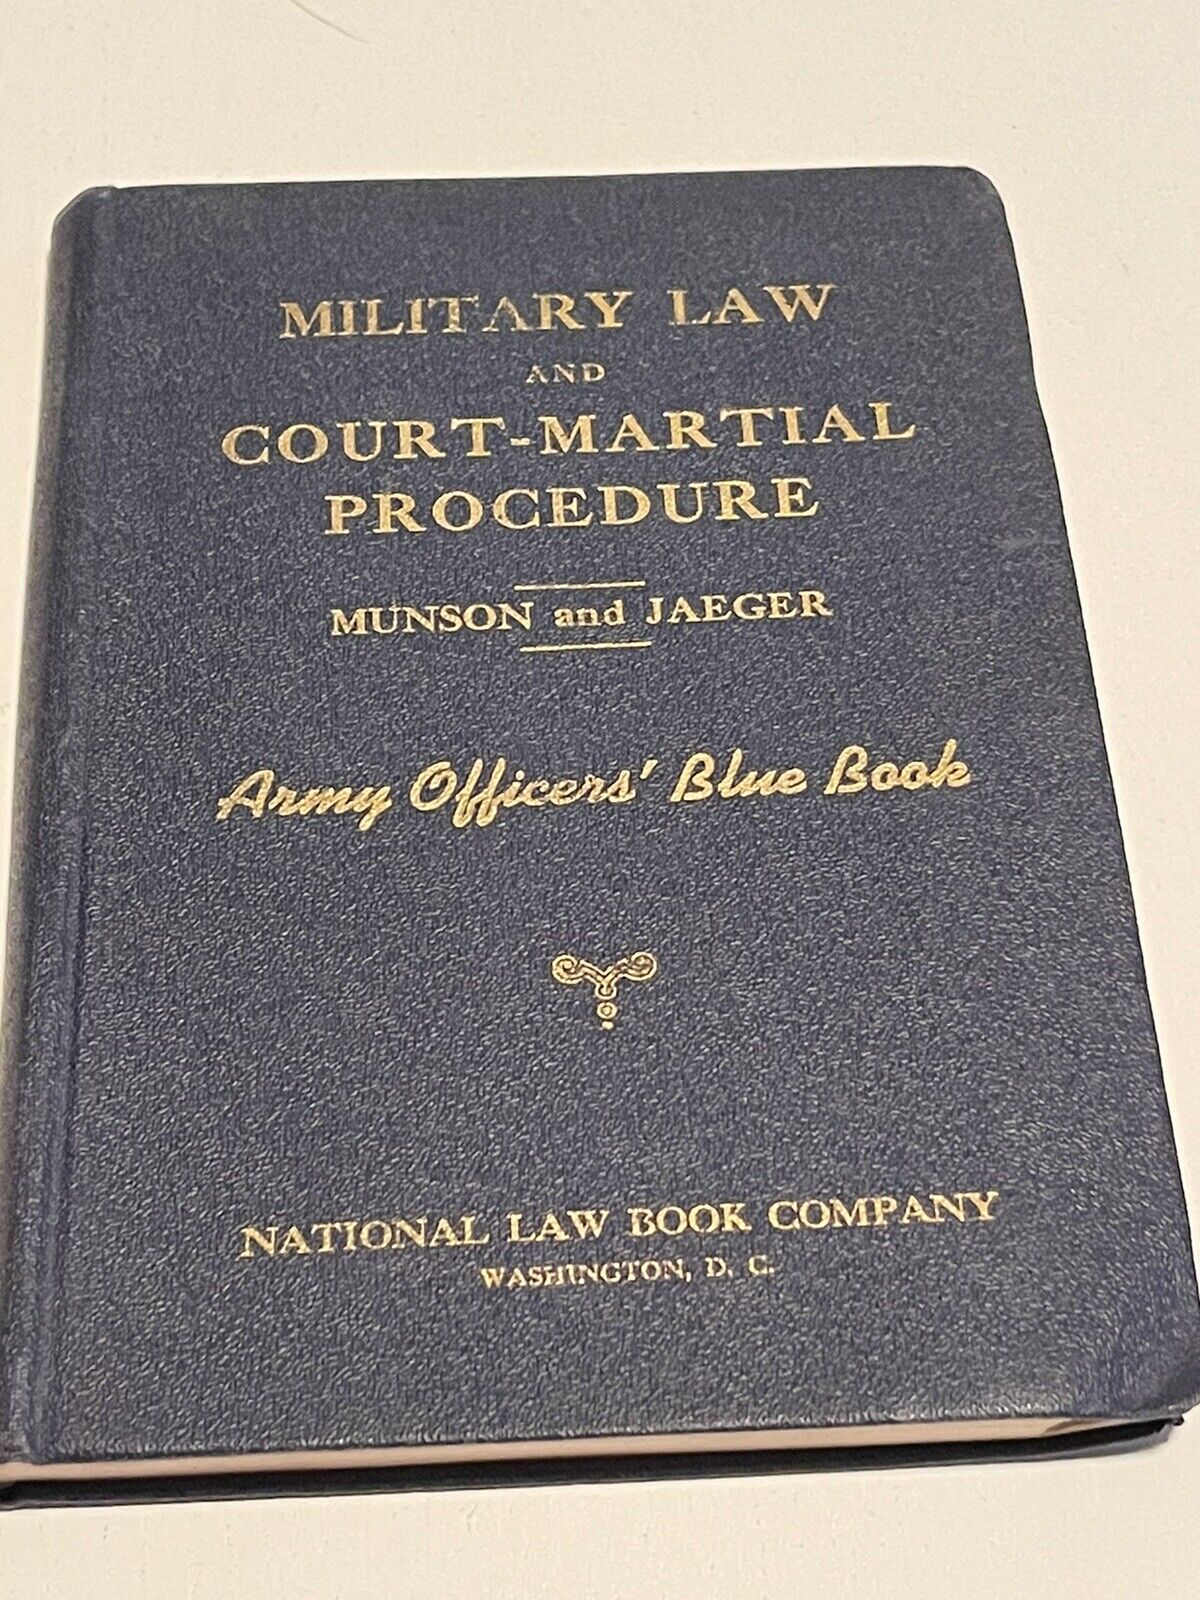 Military Law and Court Martial Procedure 1942 Army officers’ Blue Book WWII